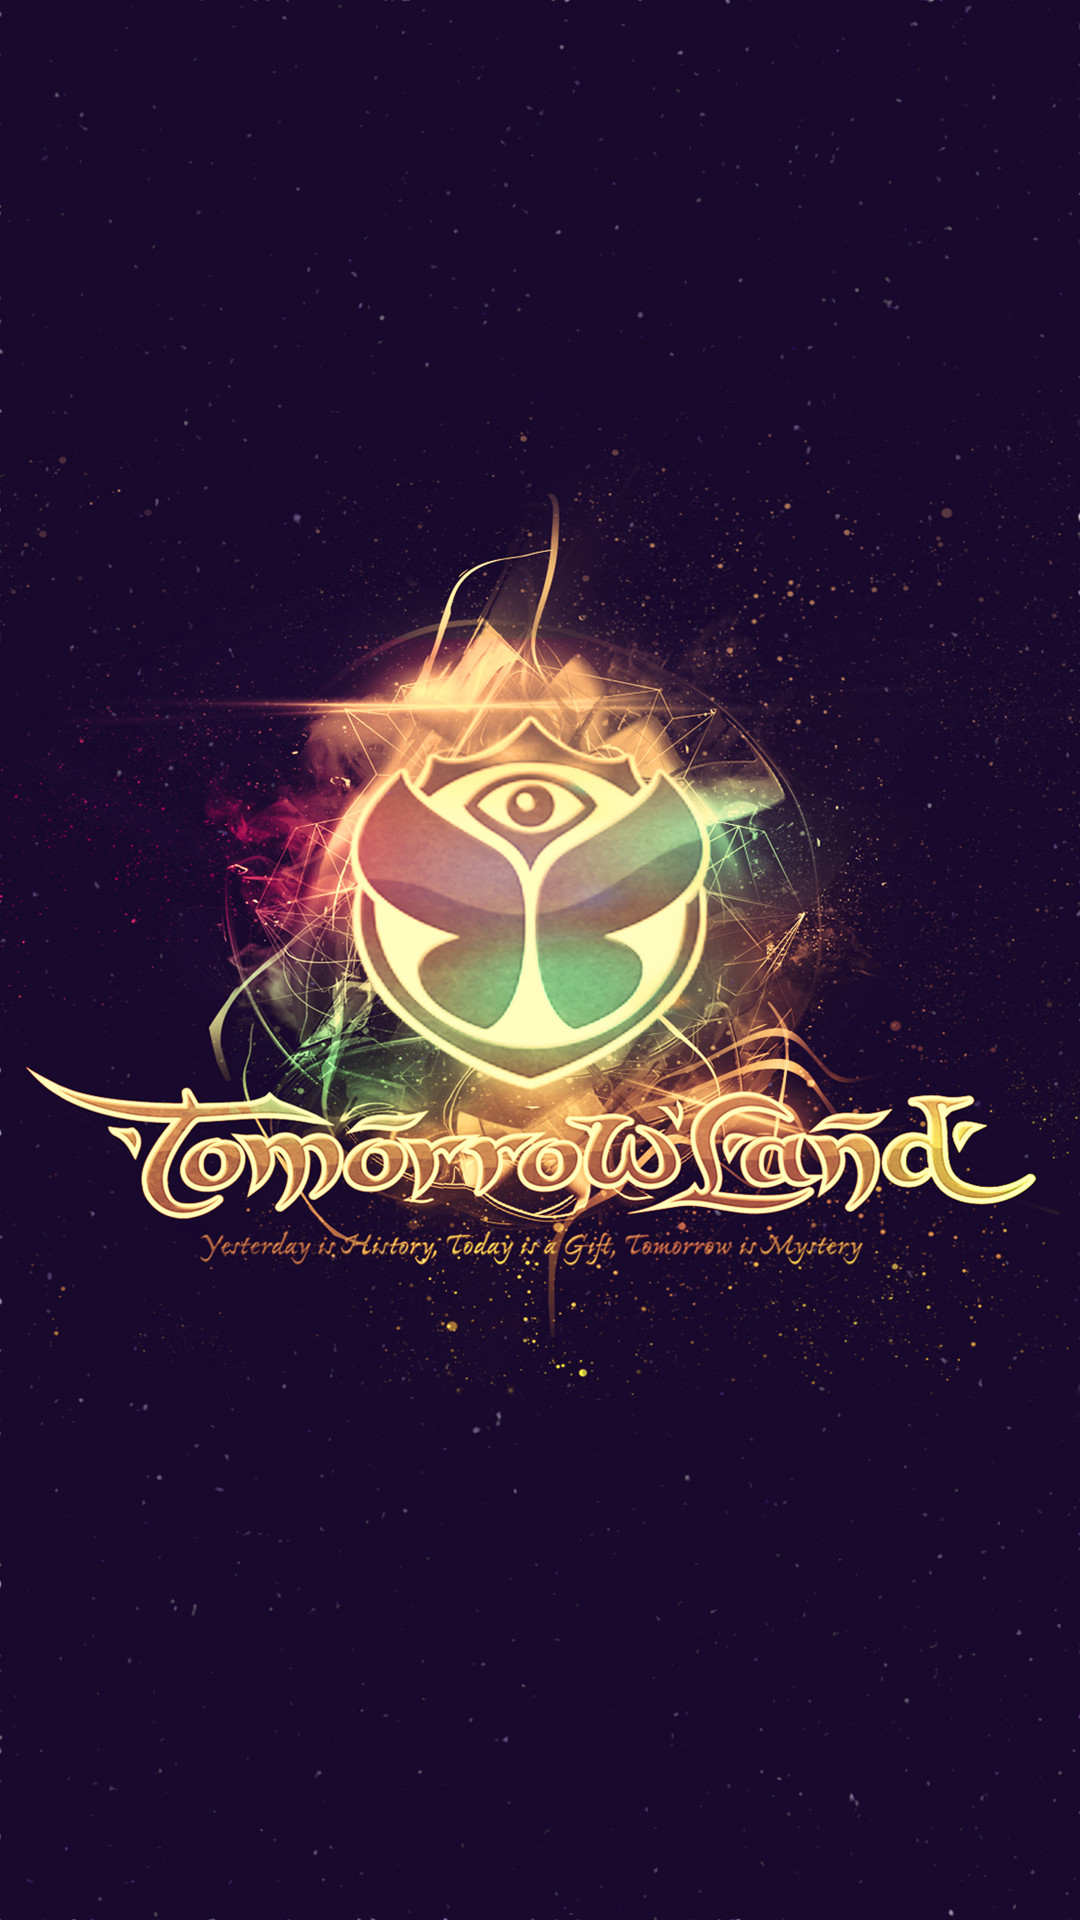 1080x1920 #Tomorrowland 2014 Electronic Music Festival Logo #Android #Wallpaper